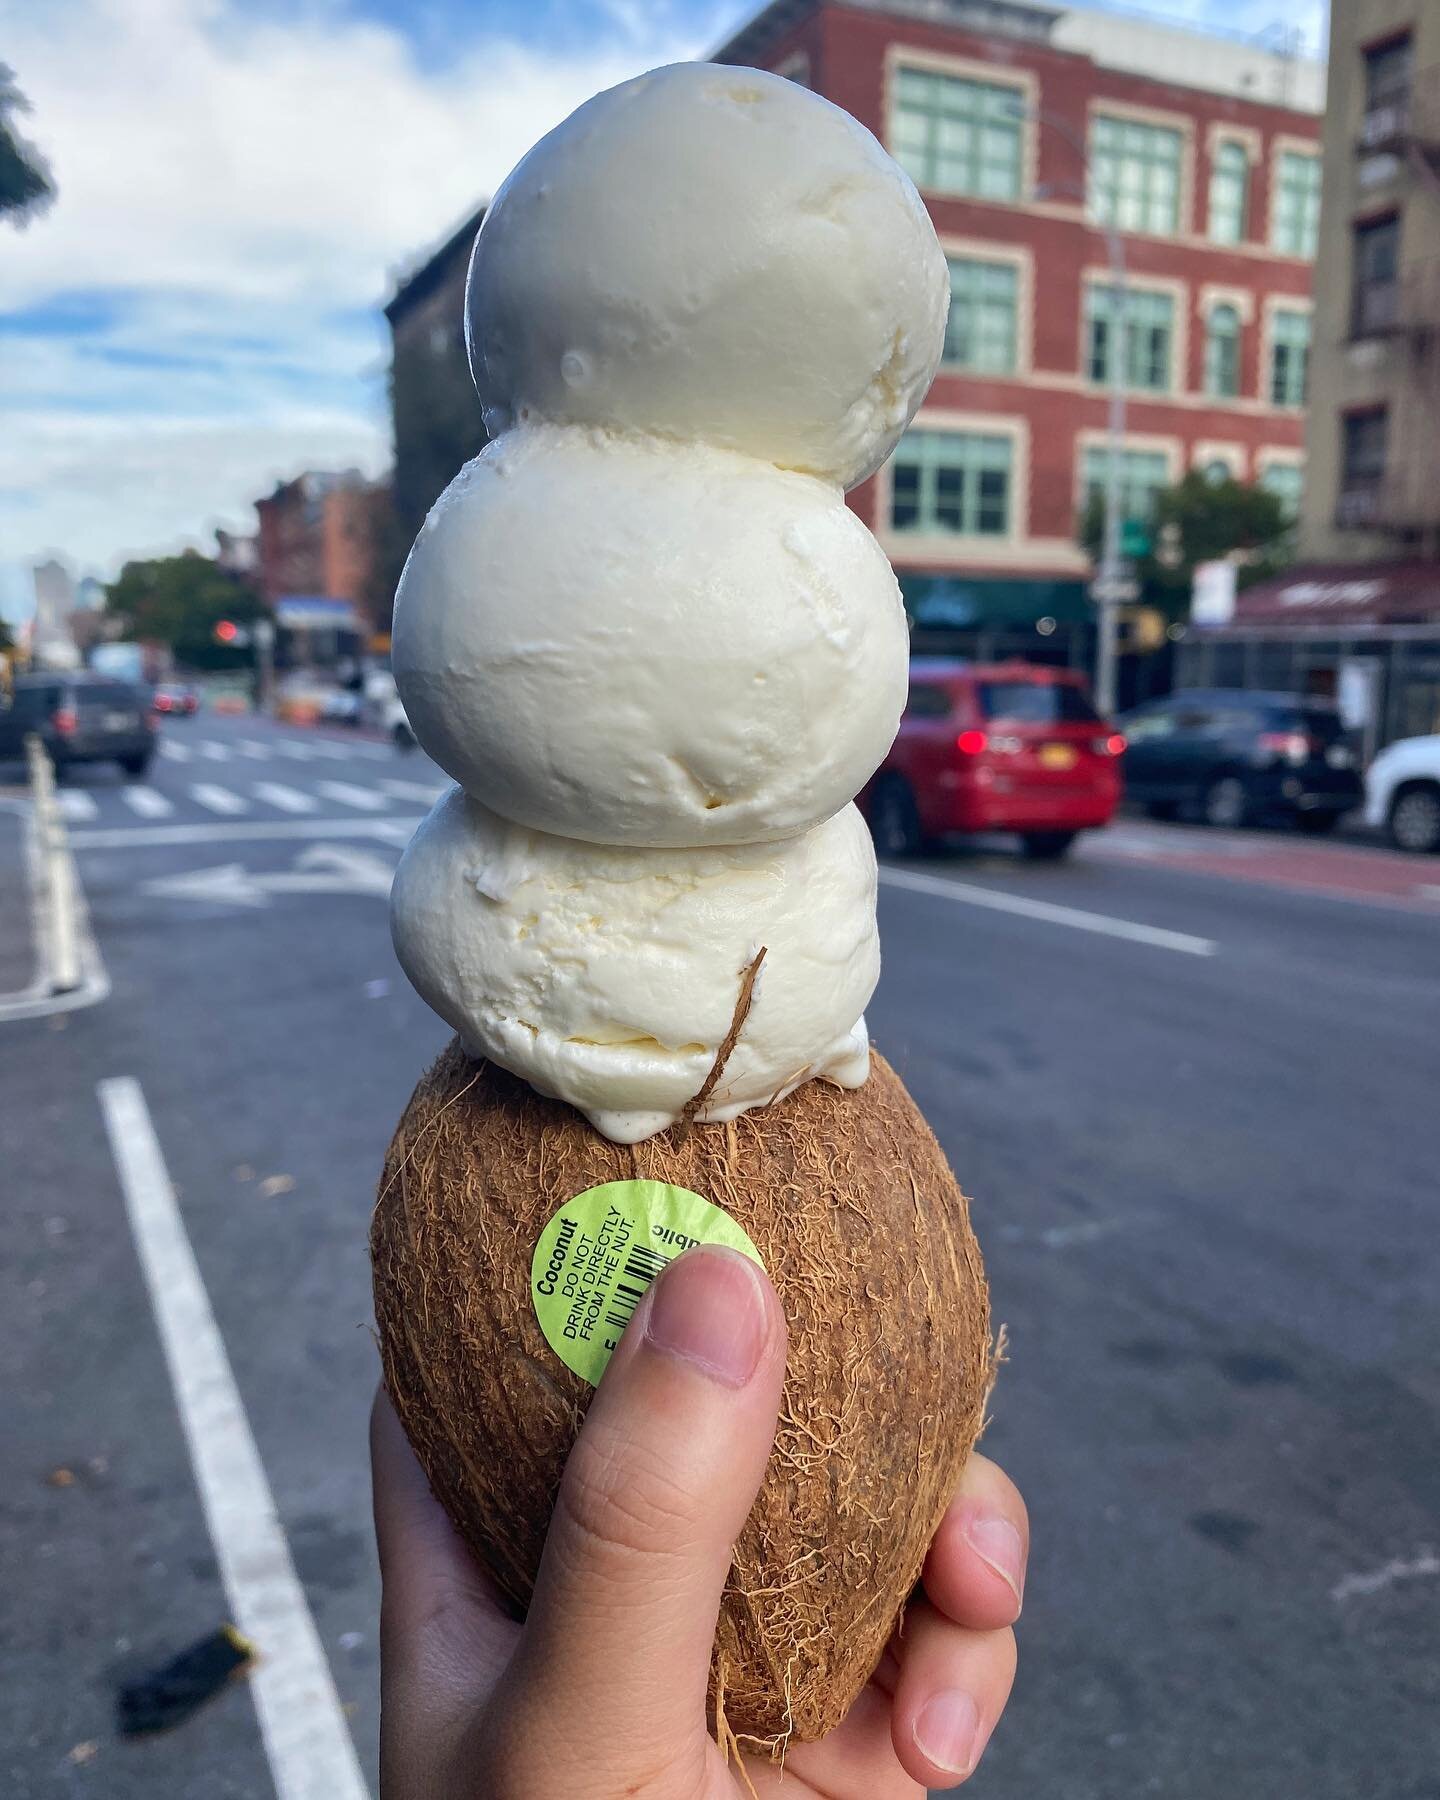 CoCoNUT - DO NOT EAT DIRECTLY FROM THE NUT 🥴
.
.
.

#stuffedicecream #Stuffed #coconut #icecreamcakes #donuticecreamsandwich #food #donuts #icecream #nyc #nycvibes #foodporn #sweets #date #dessert #stuffedbouquet #bouquet #heresmyfood #yougottaeatth